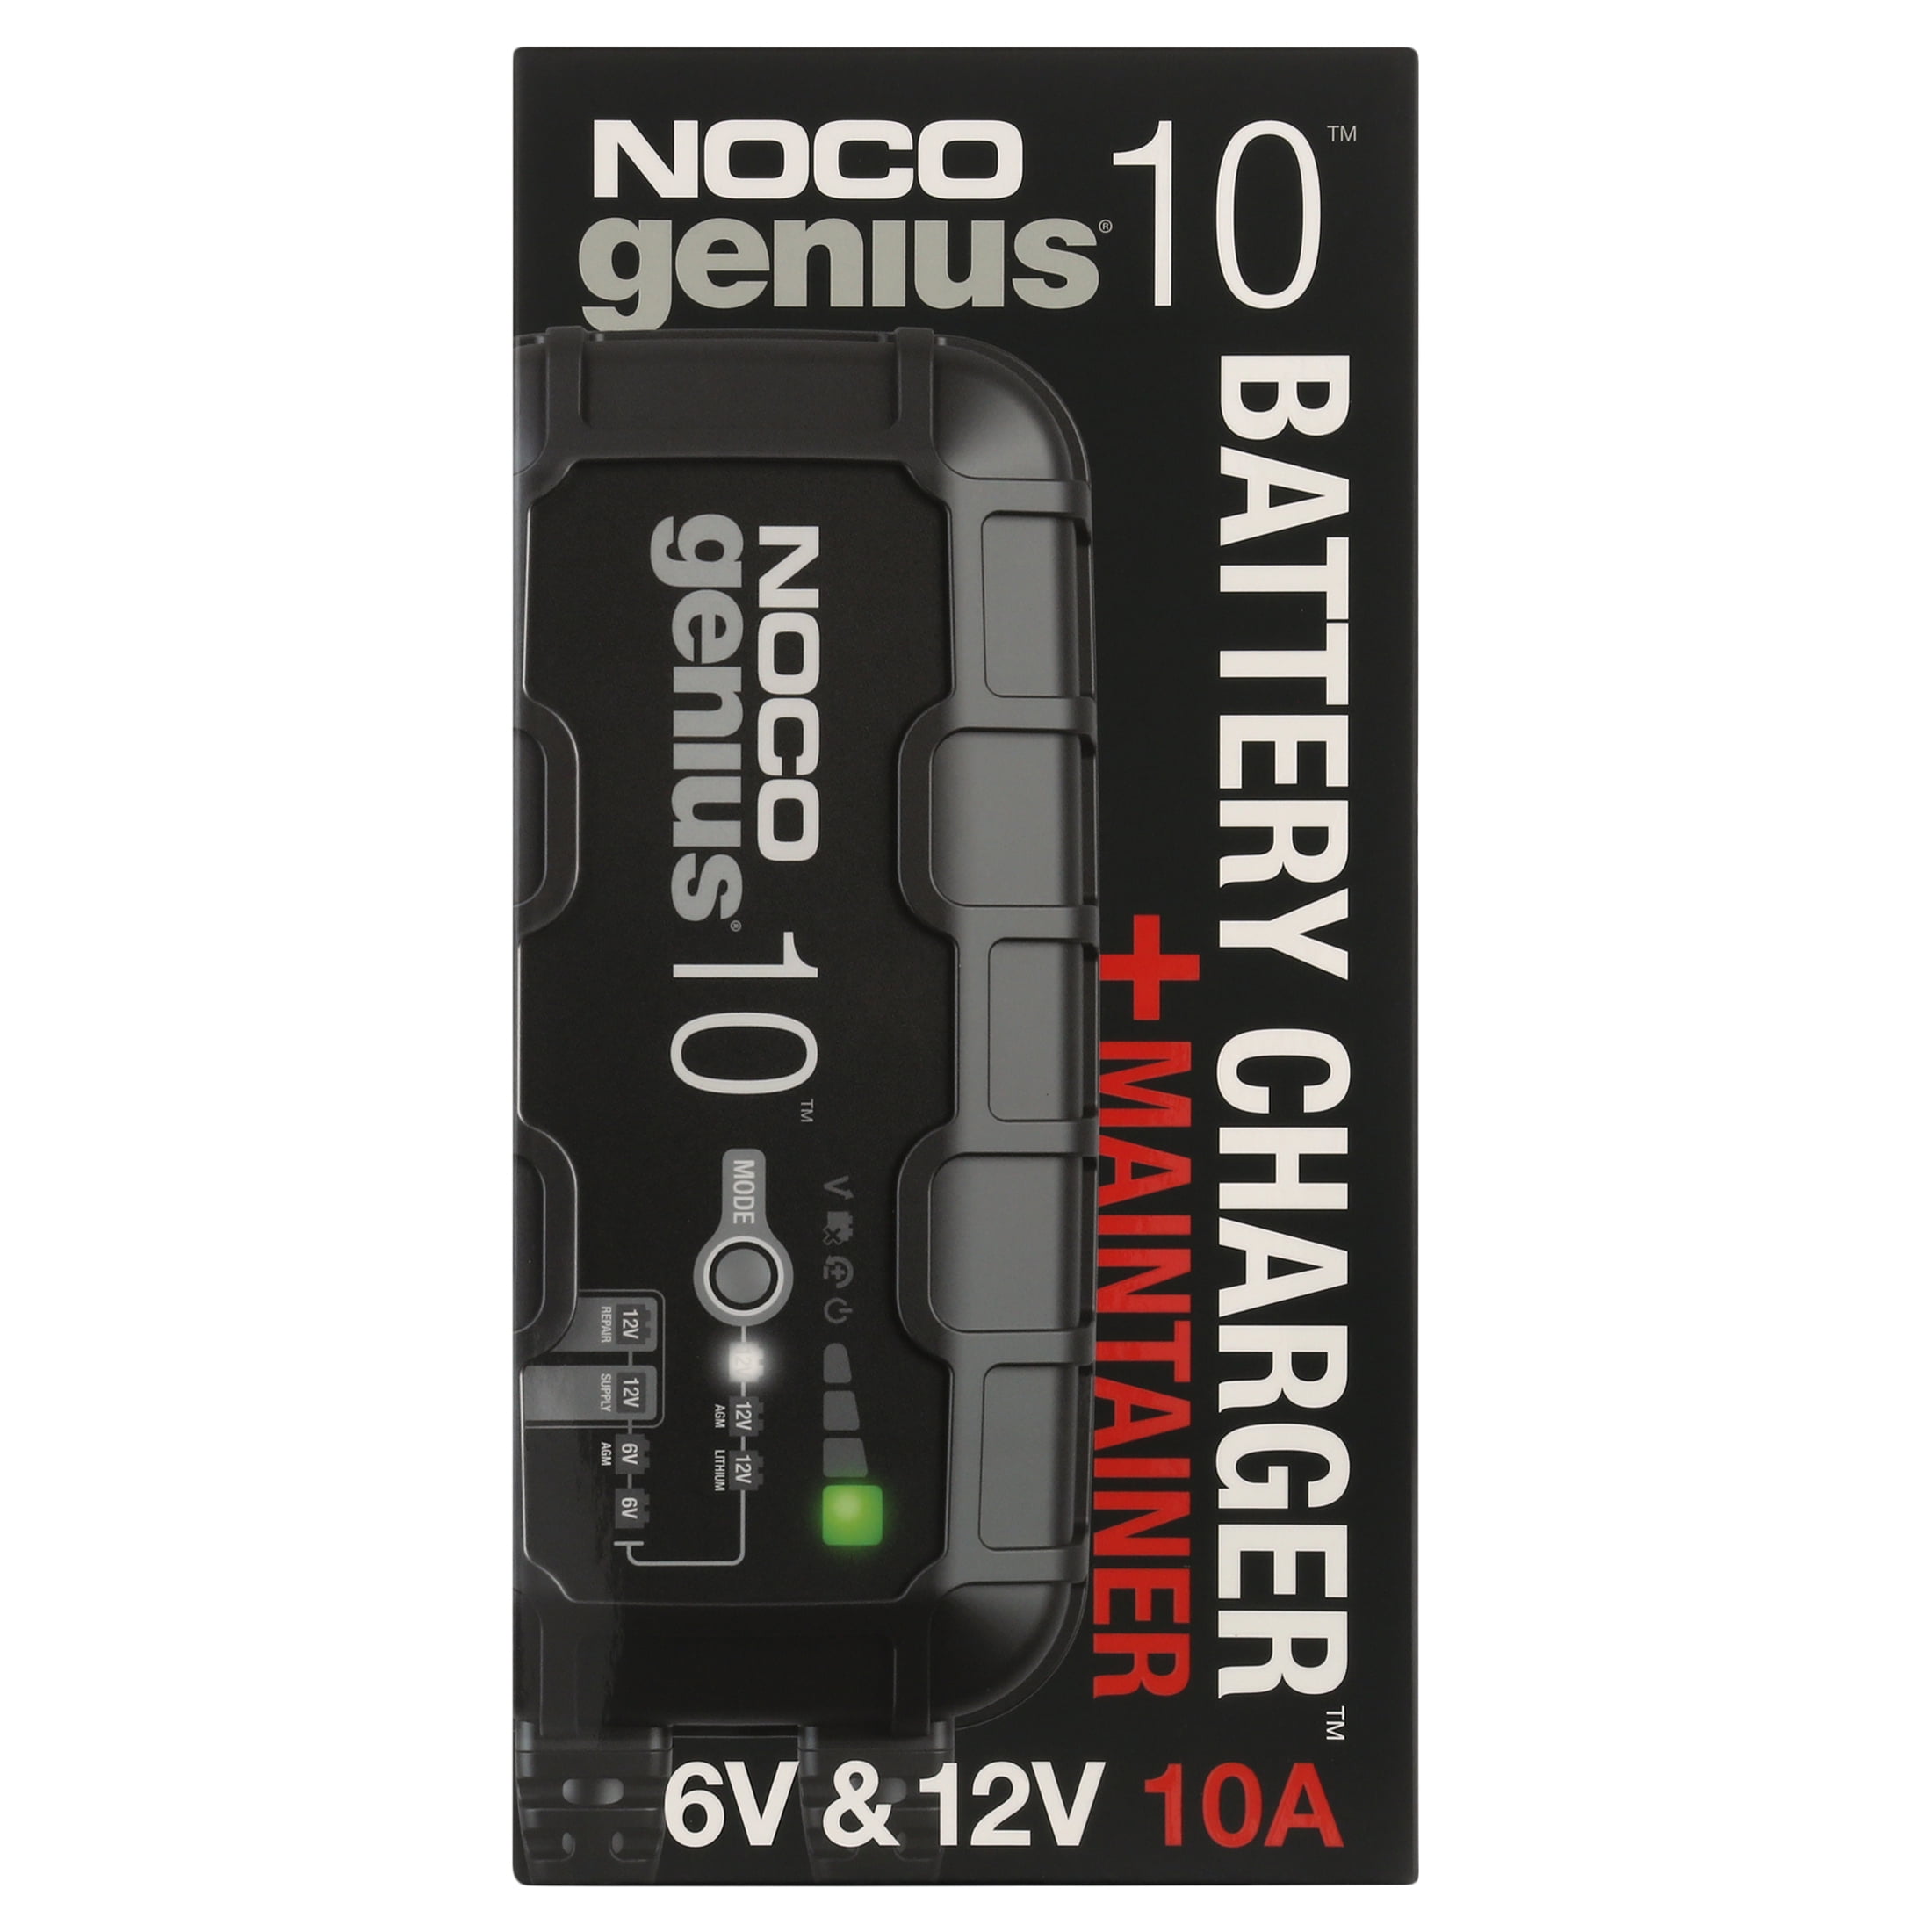 GMC Genius 10 Smart Battery Charger by NOCO® - Associated